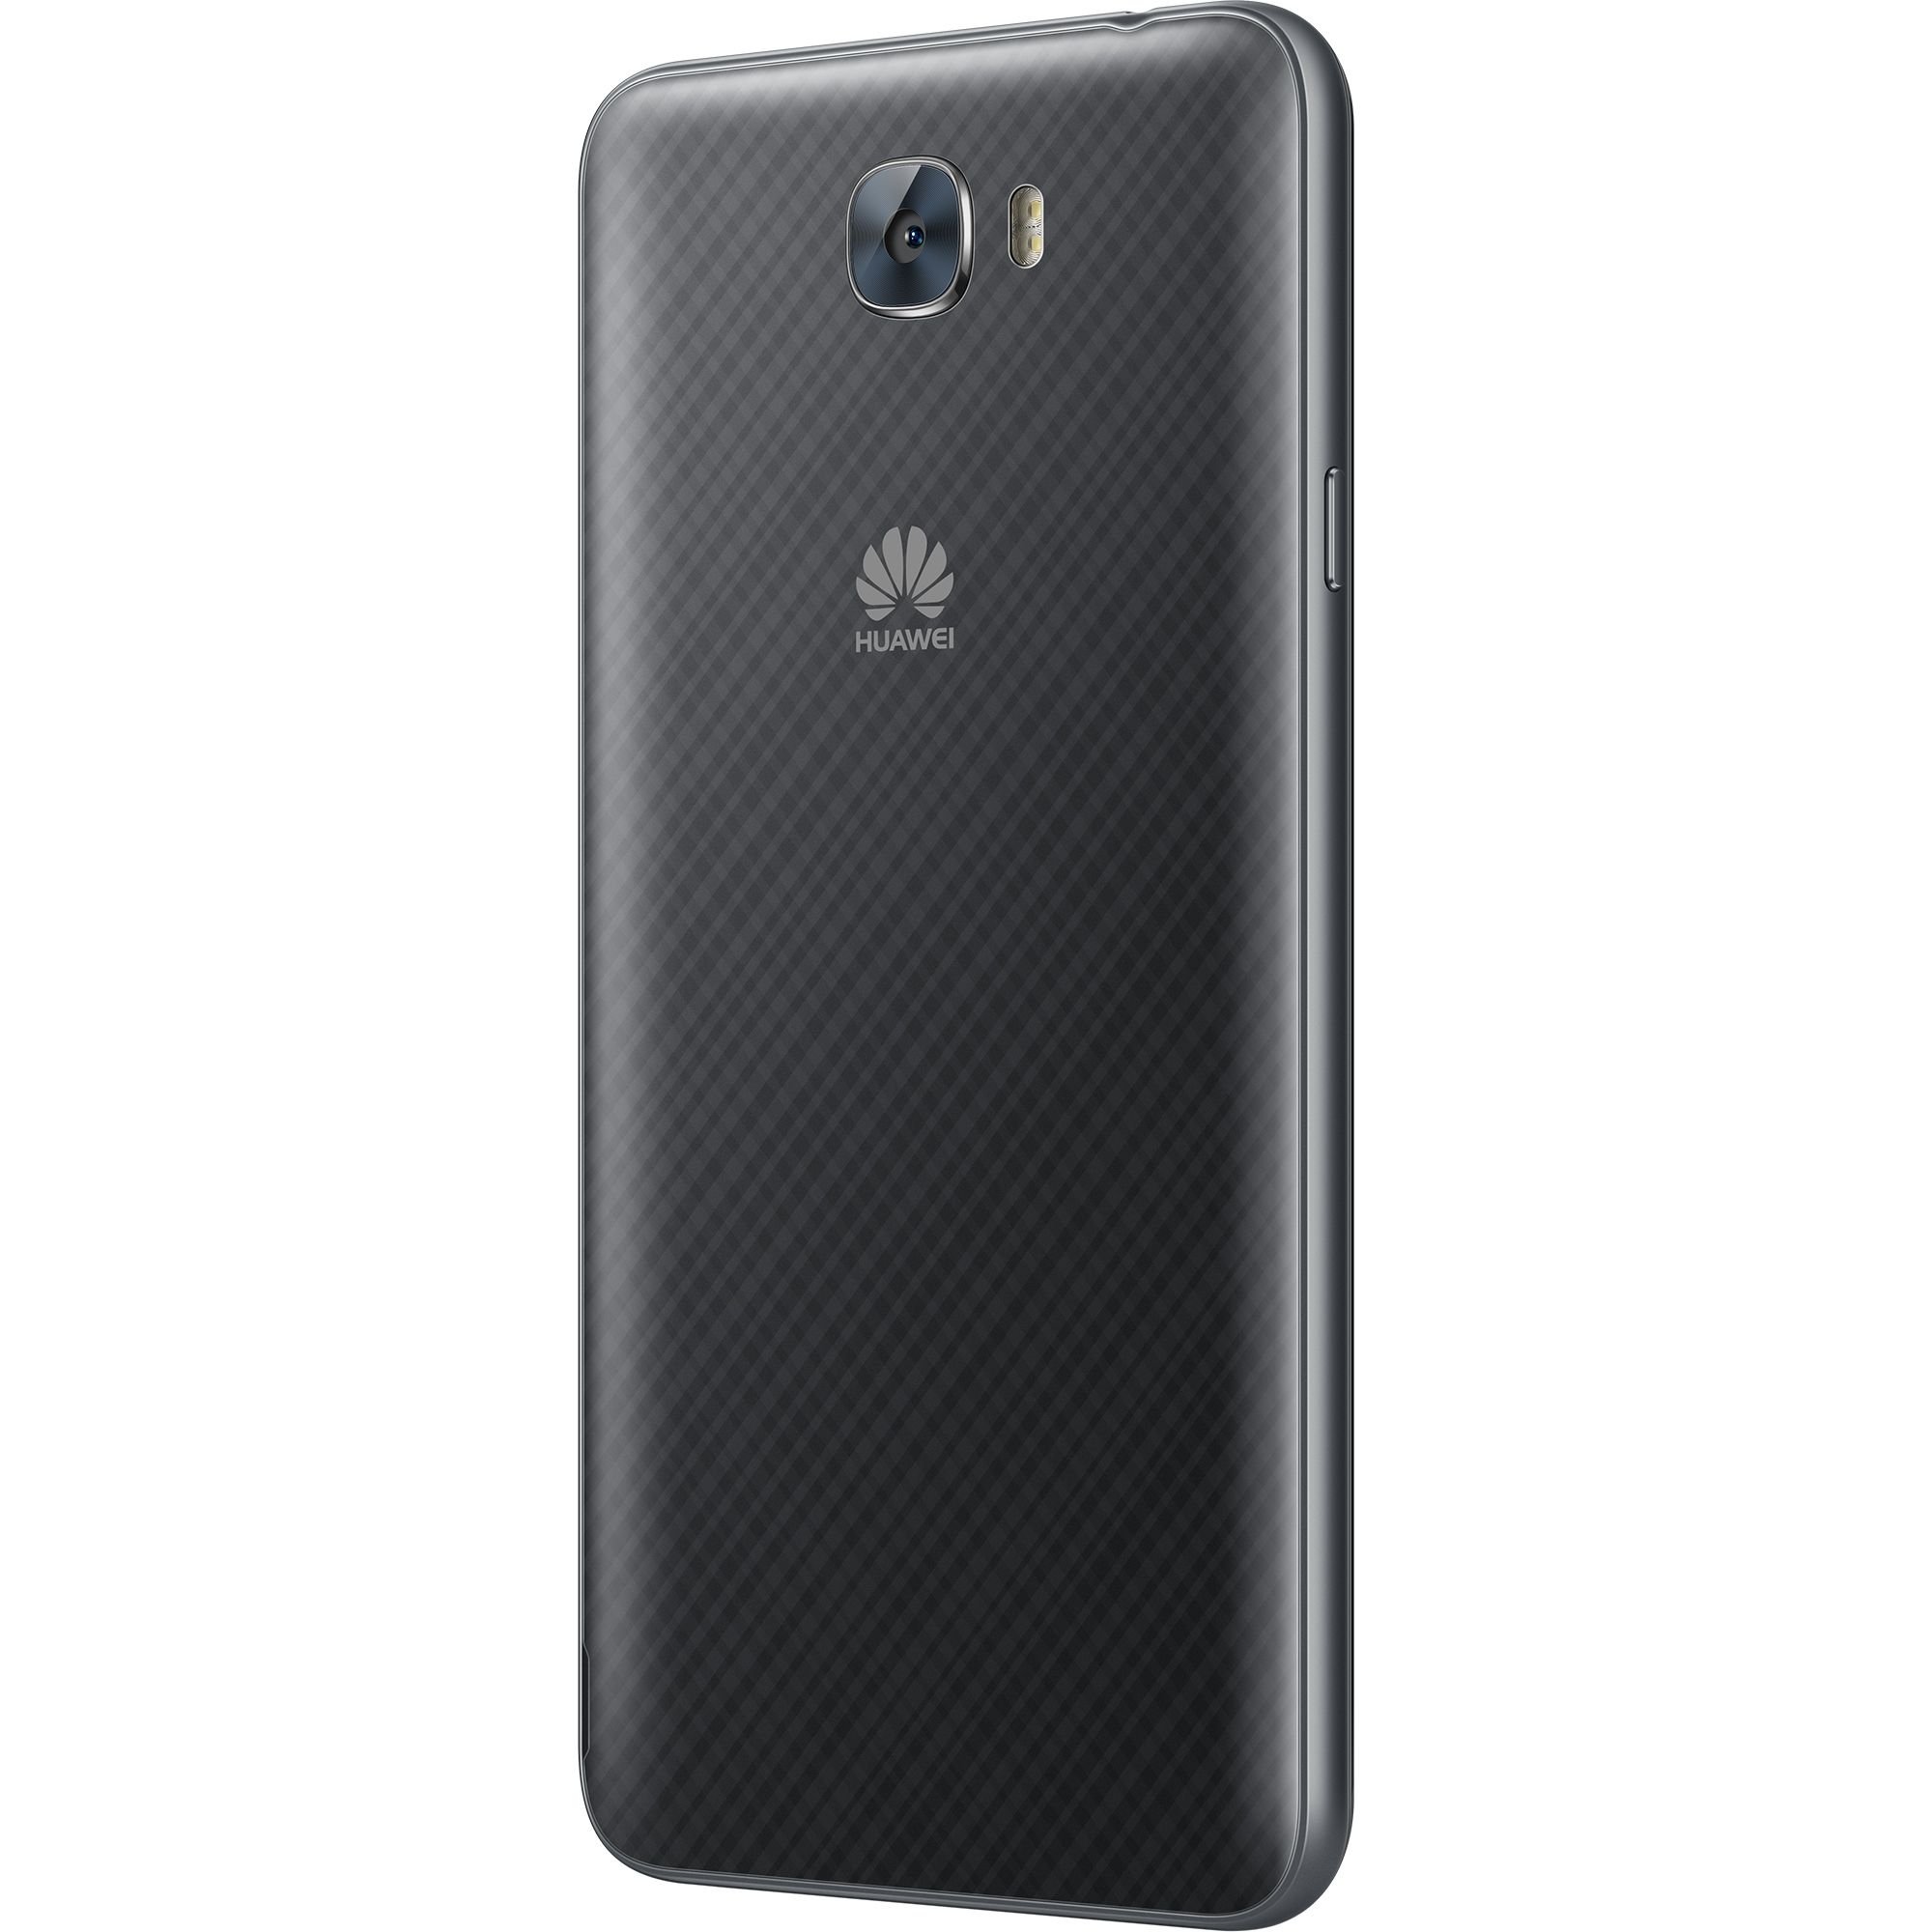 Huawei Y6II Compact specs, review, release - PhonesData